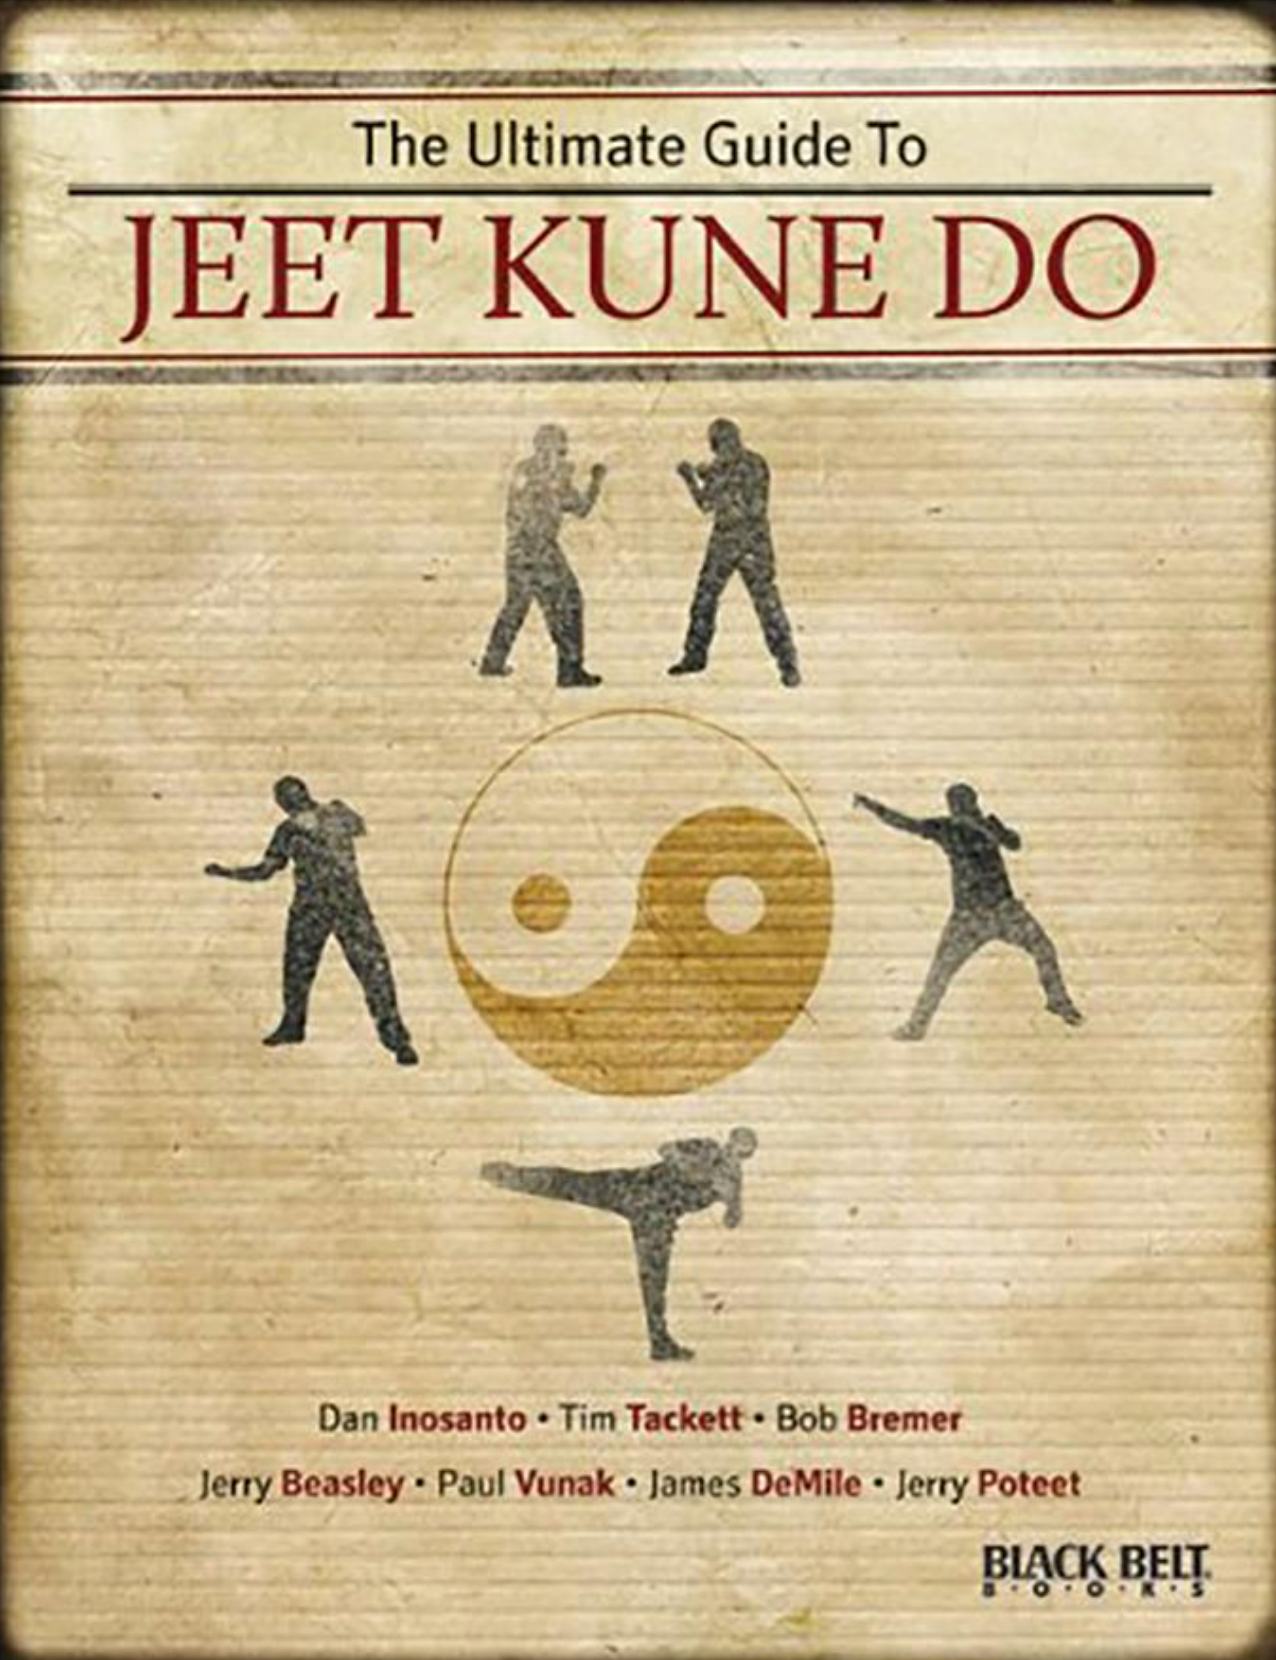 The Ultimate Guide to Jeet Kune Do Book - Budovideos Inc